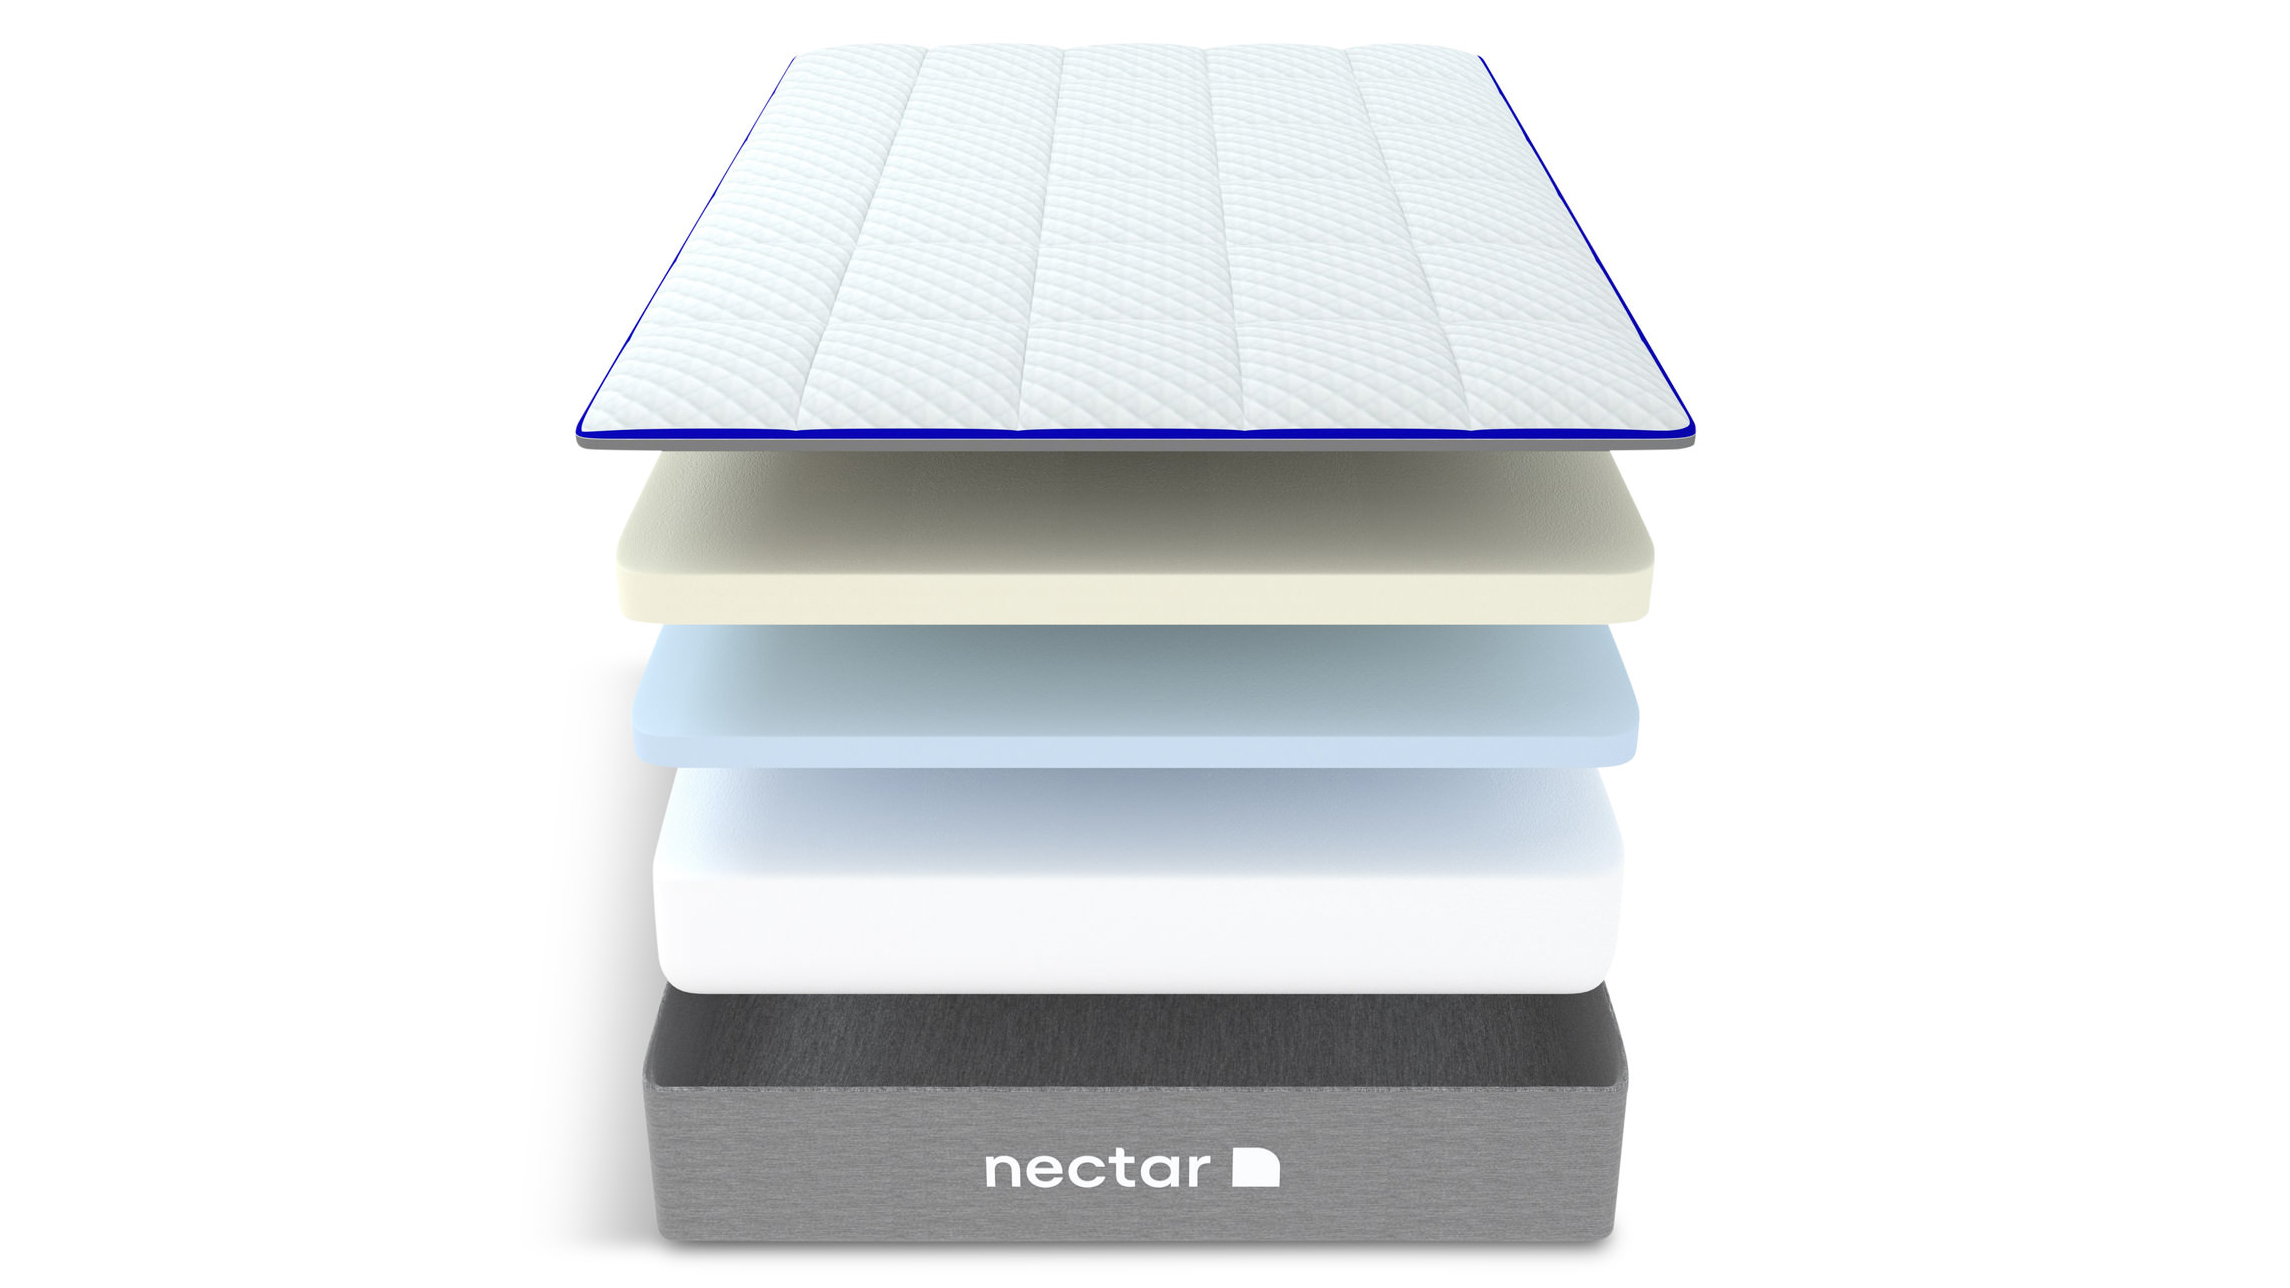 Nectar Mattress Review 2022 | Tom's Guide